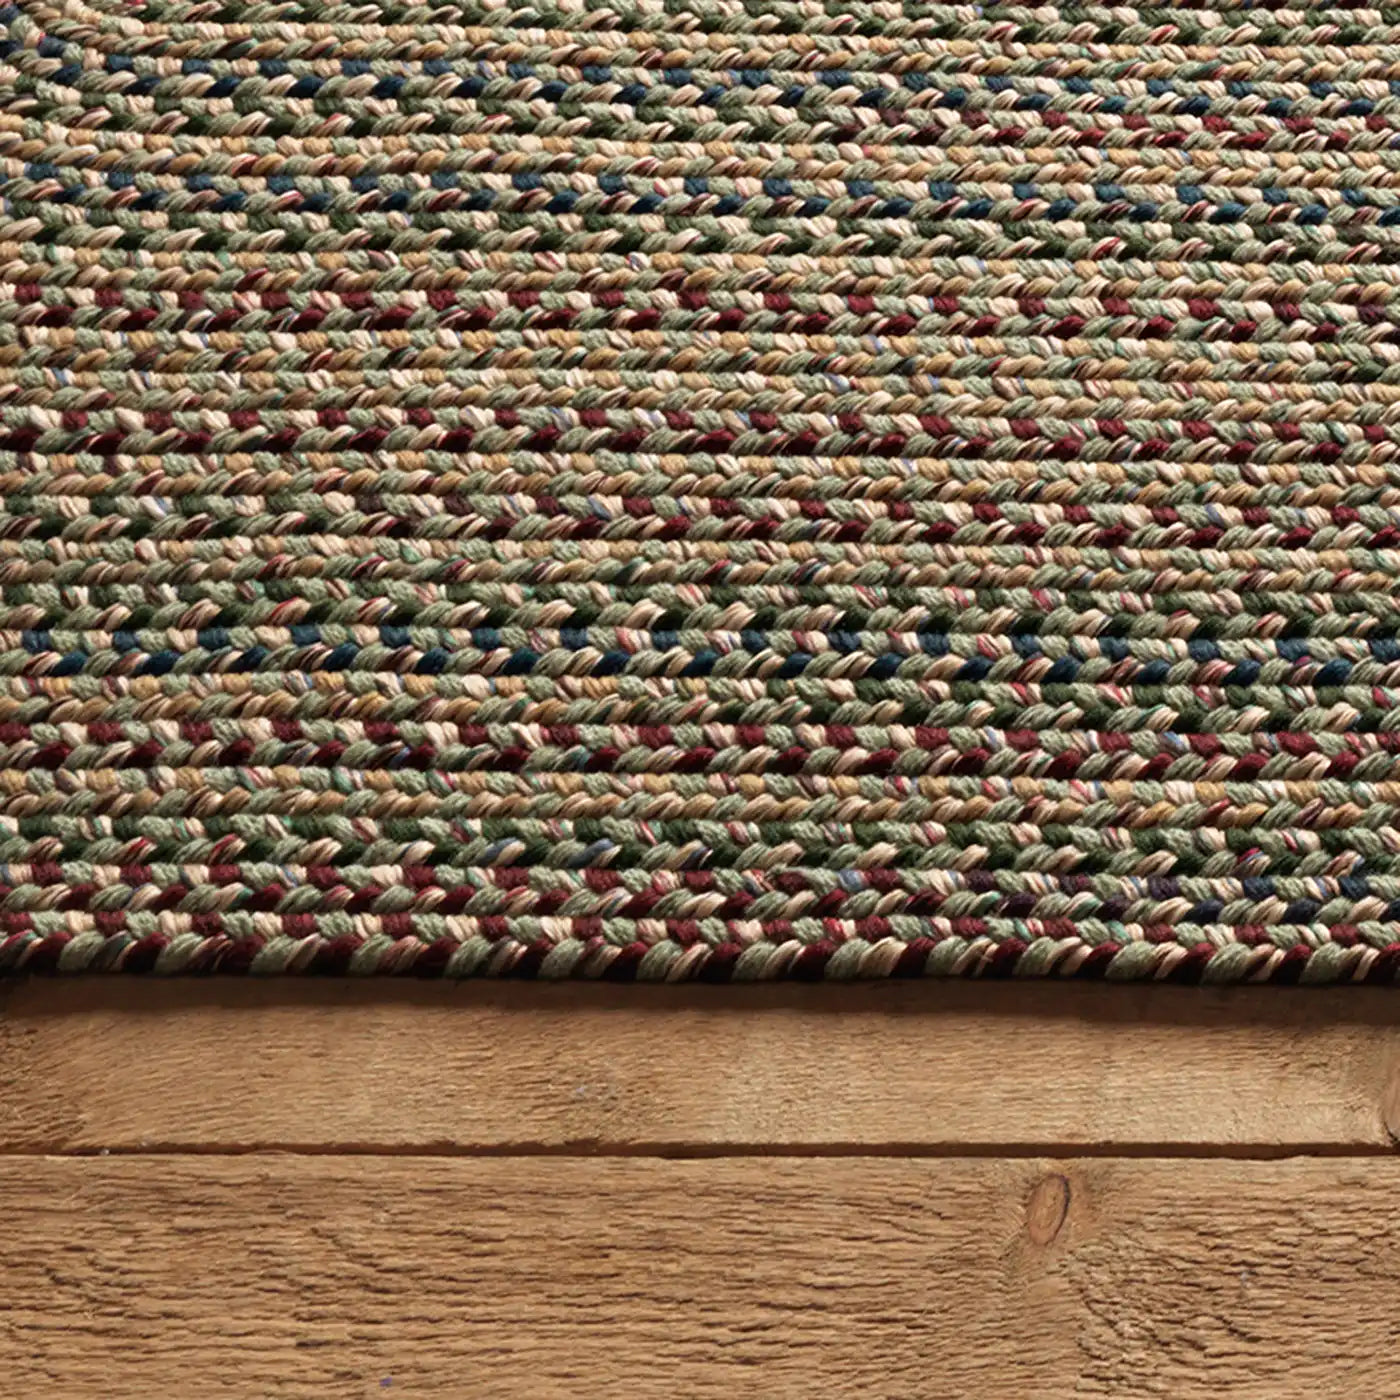 Colonial Mills Worley Brown Handcraft Braided Runner Rug in Braided & Farmhouse/Rustic style.